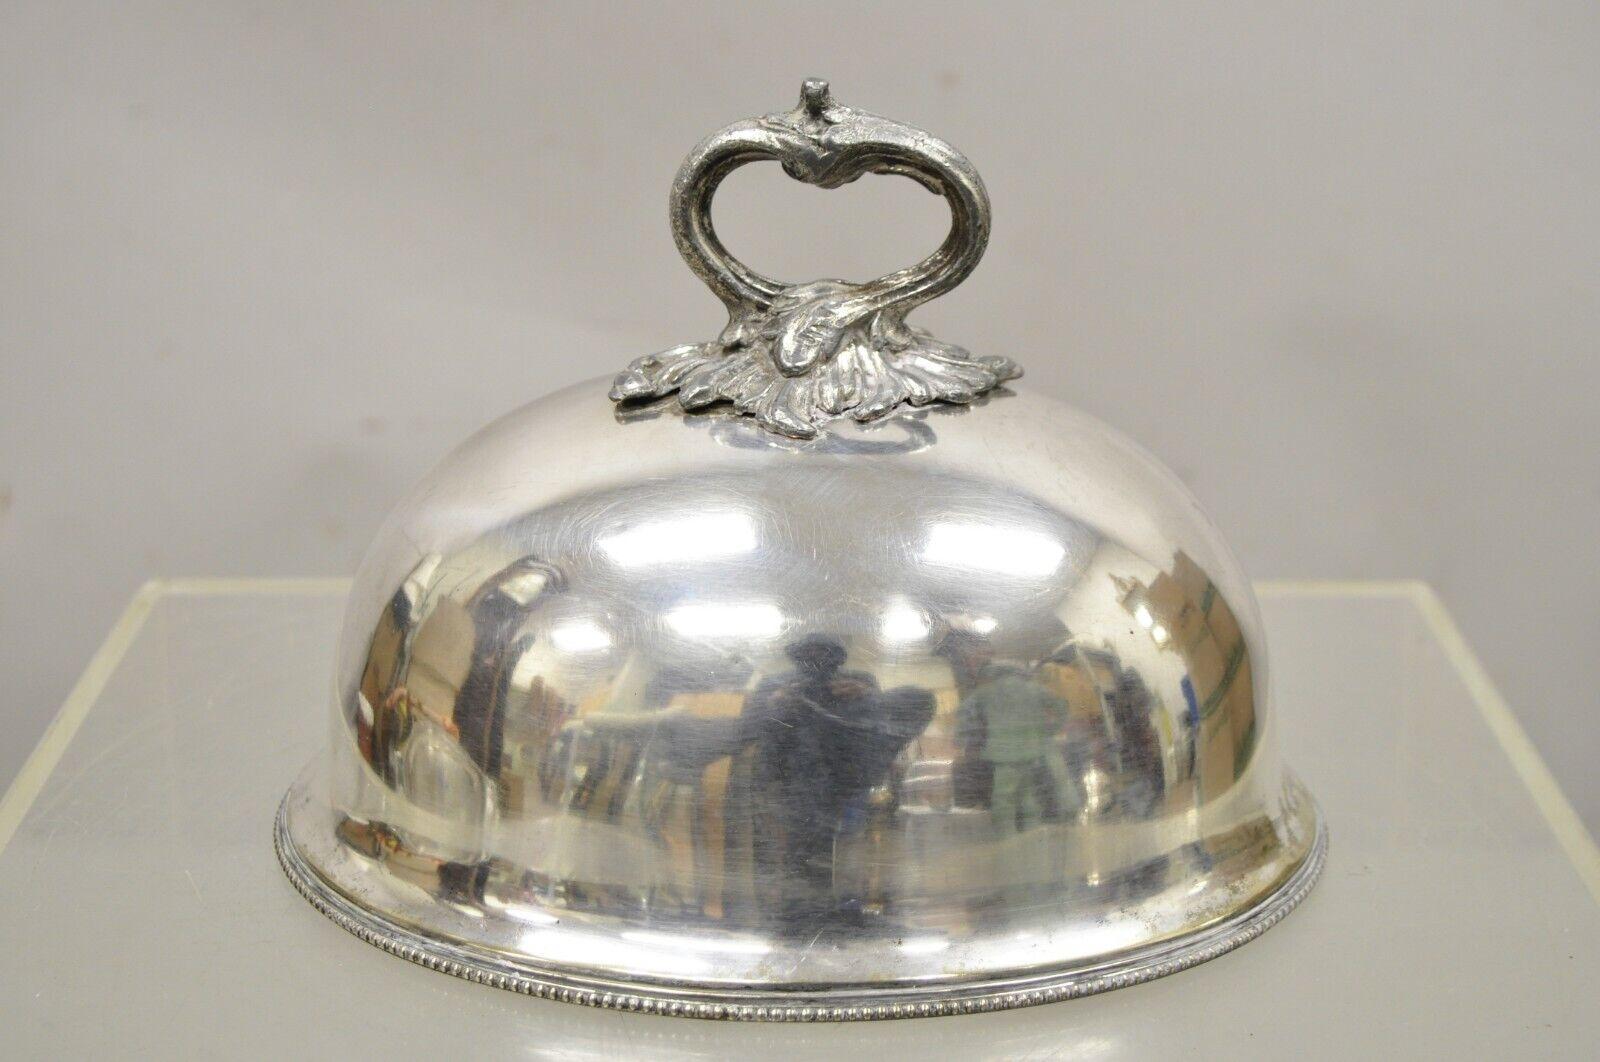 Antique English William Hutton Sons Silver Plated Meat Dish Serving Dome Lid 5